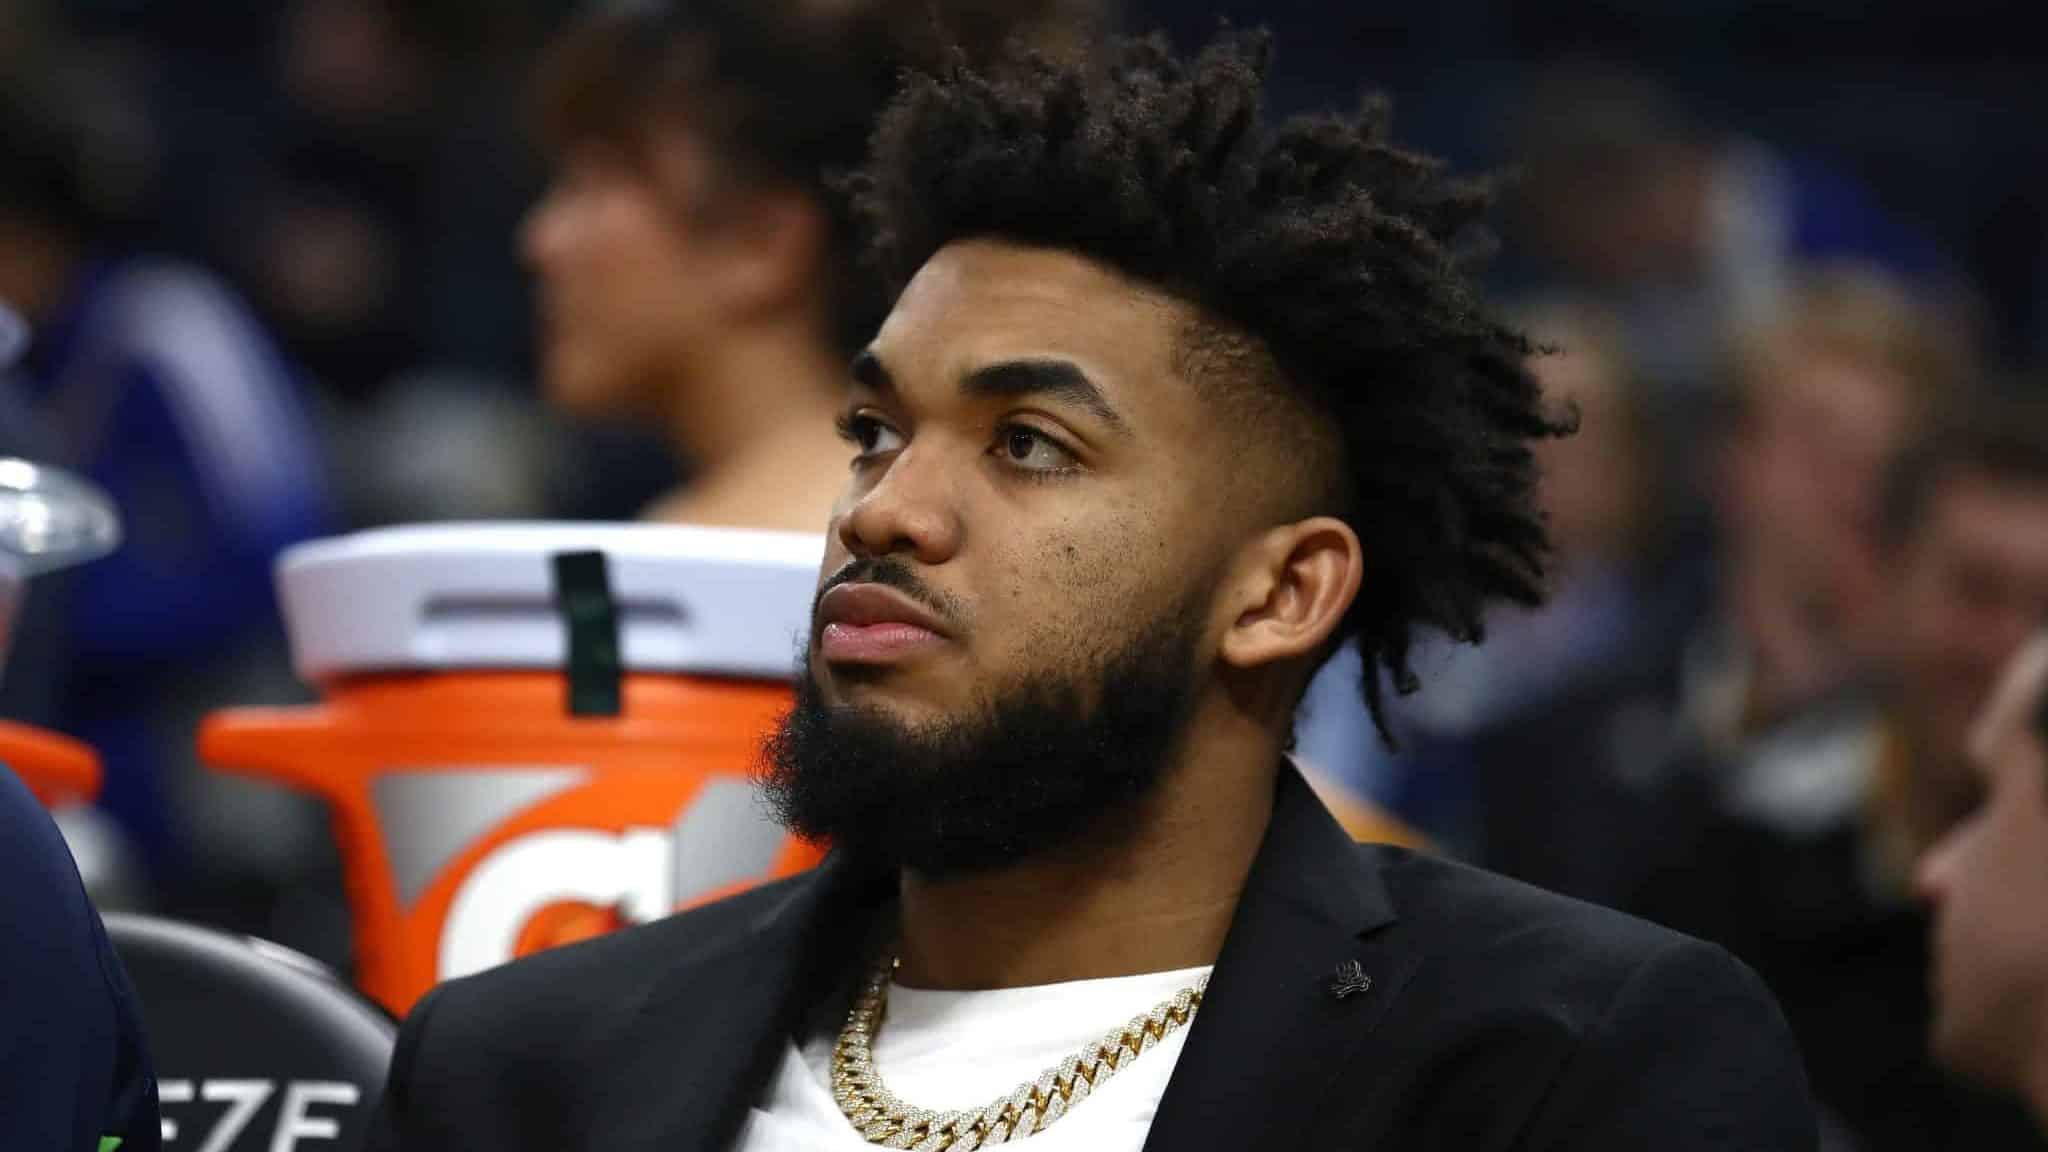 SAN FRANCISCO, CALIFORNIA - DECEMBER 23: Injured Karl-Anthony Towns #32 of the Minnesota Timberwolves watches his team play against the Golden State Warriors at Chase Center on December 23, 2019 in San Francisco, California. NOTE TO USER: User expressly acknowledges and agrees that, by downloading and/or using this photograph, user is consenting to the terms and conditions of the Getty Images License Agreement.